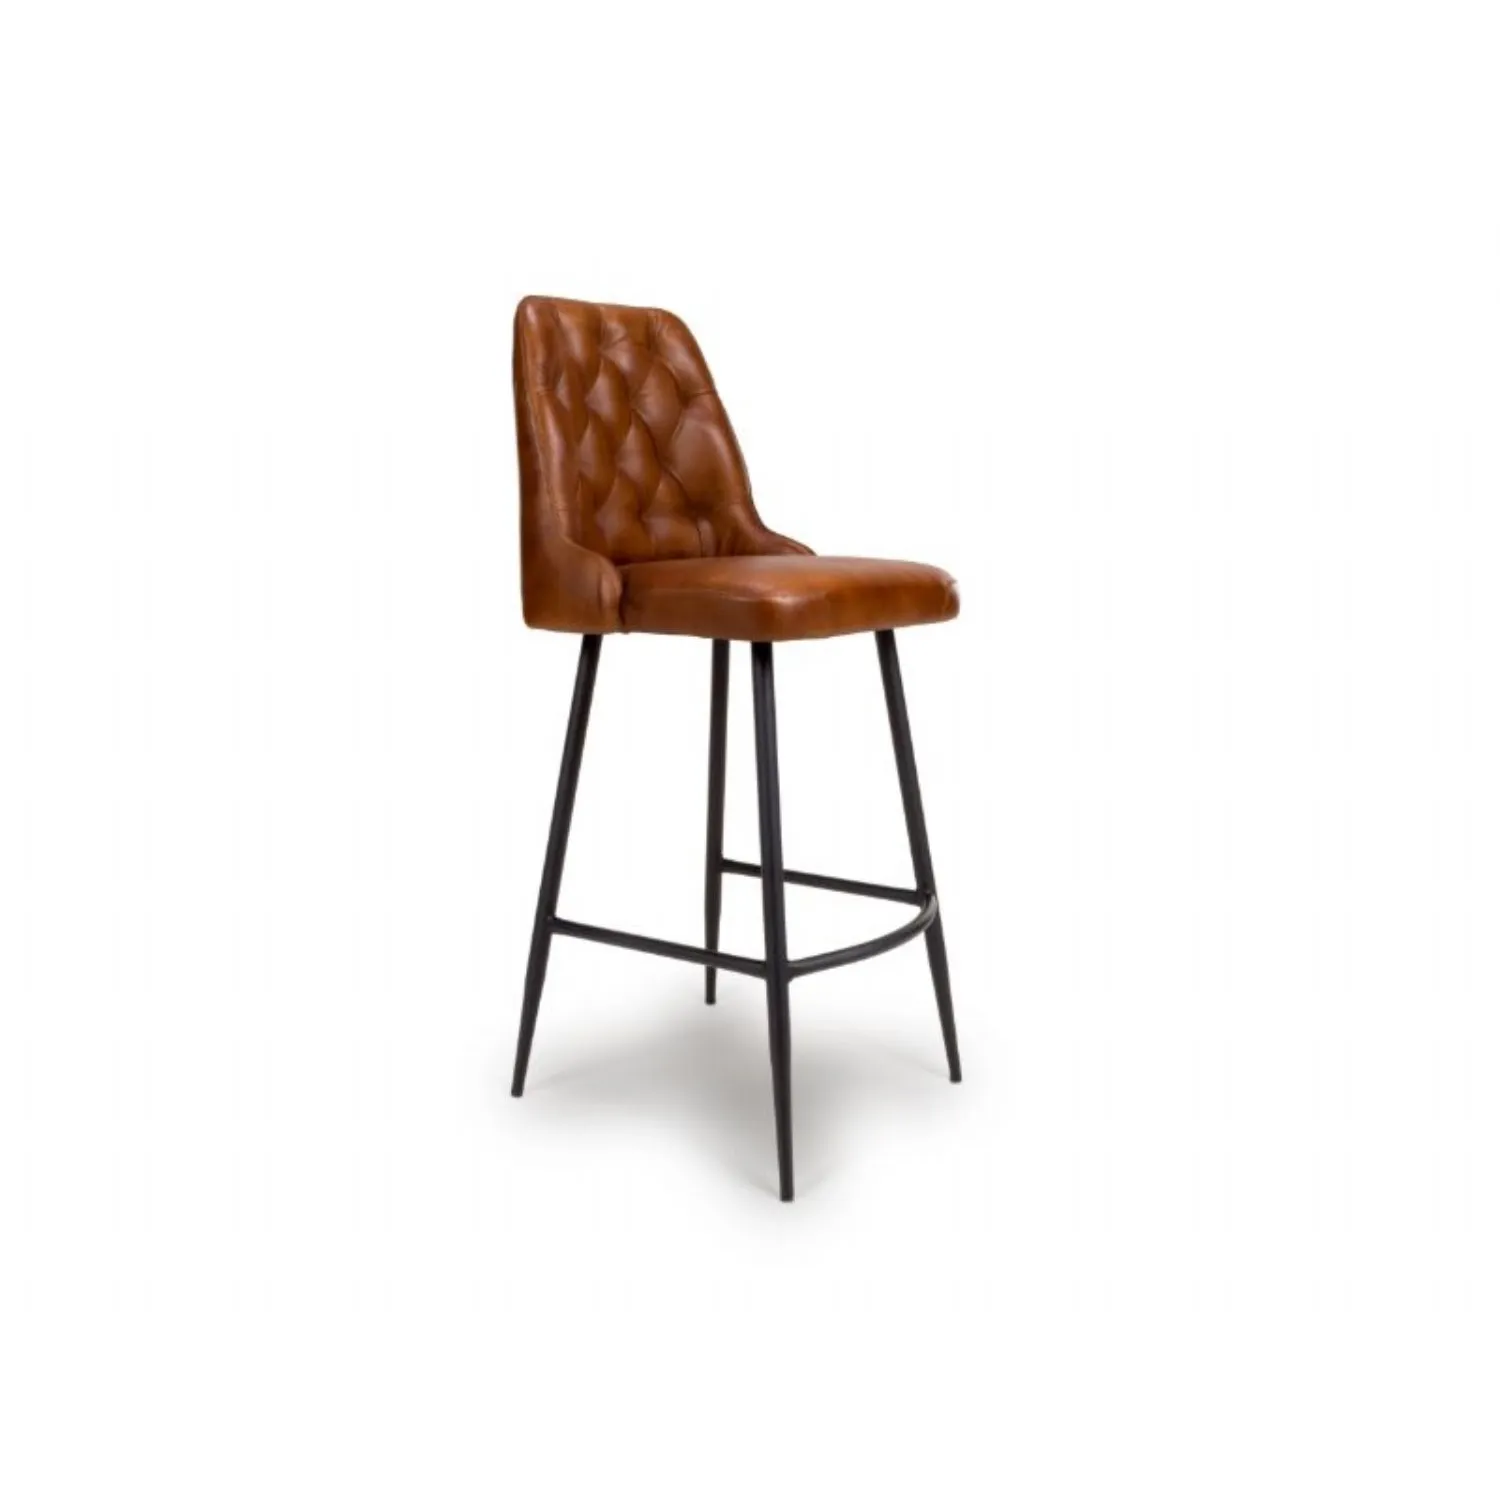 Tan Brown Leather Bar Chair Stool with Black Metal Legs